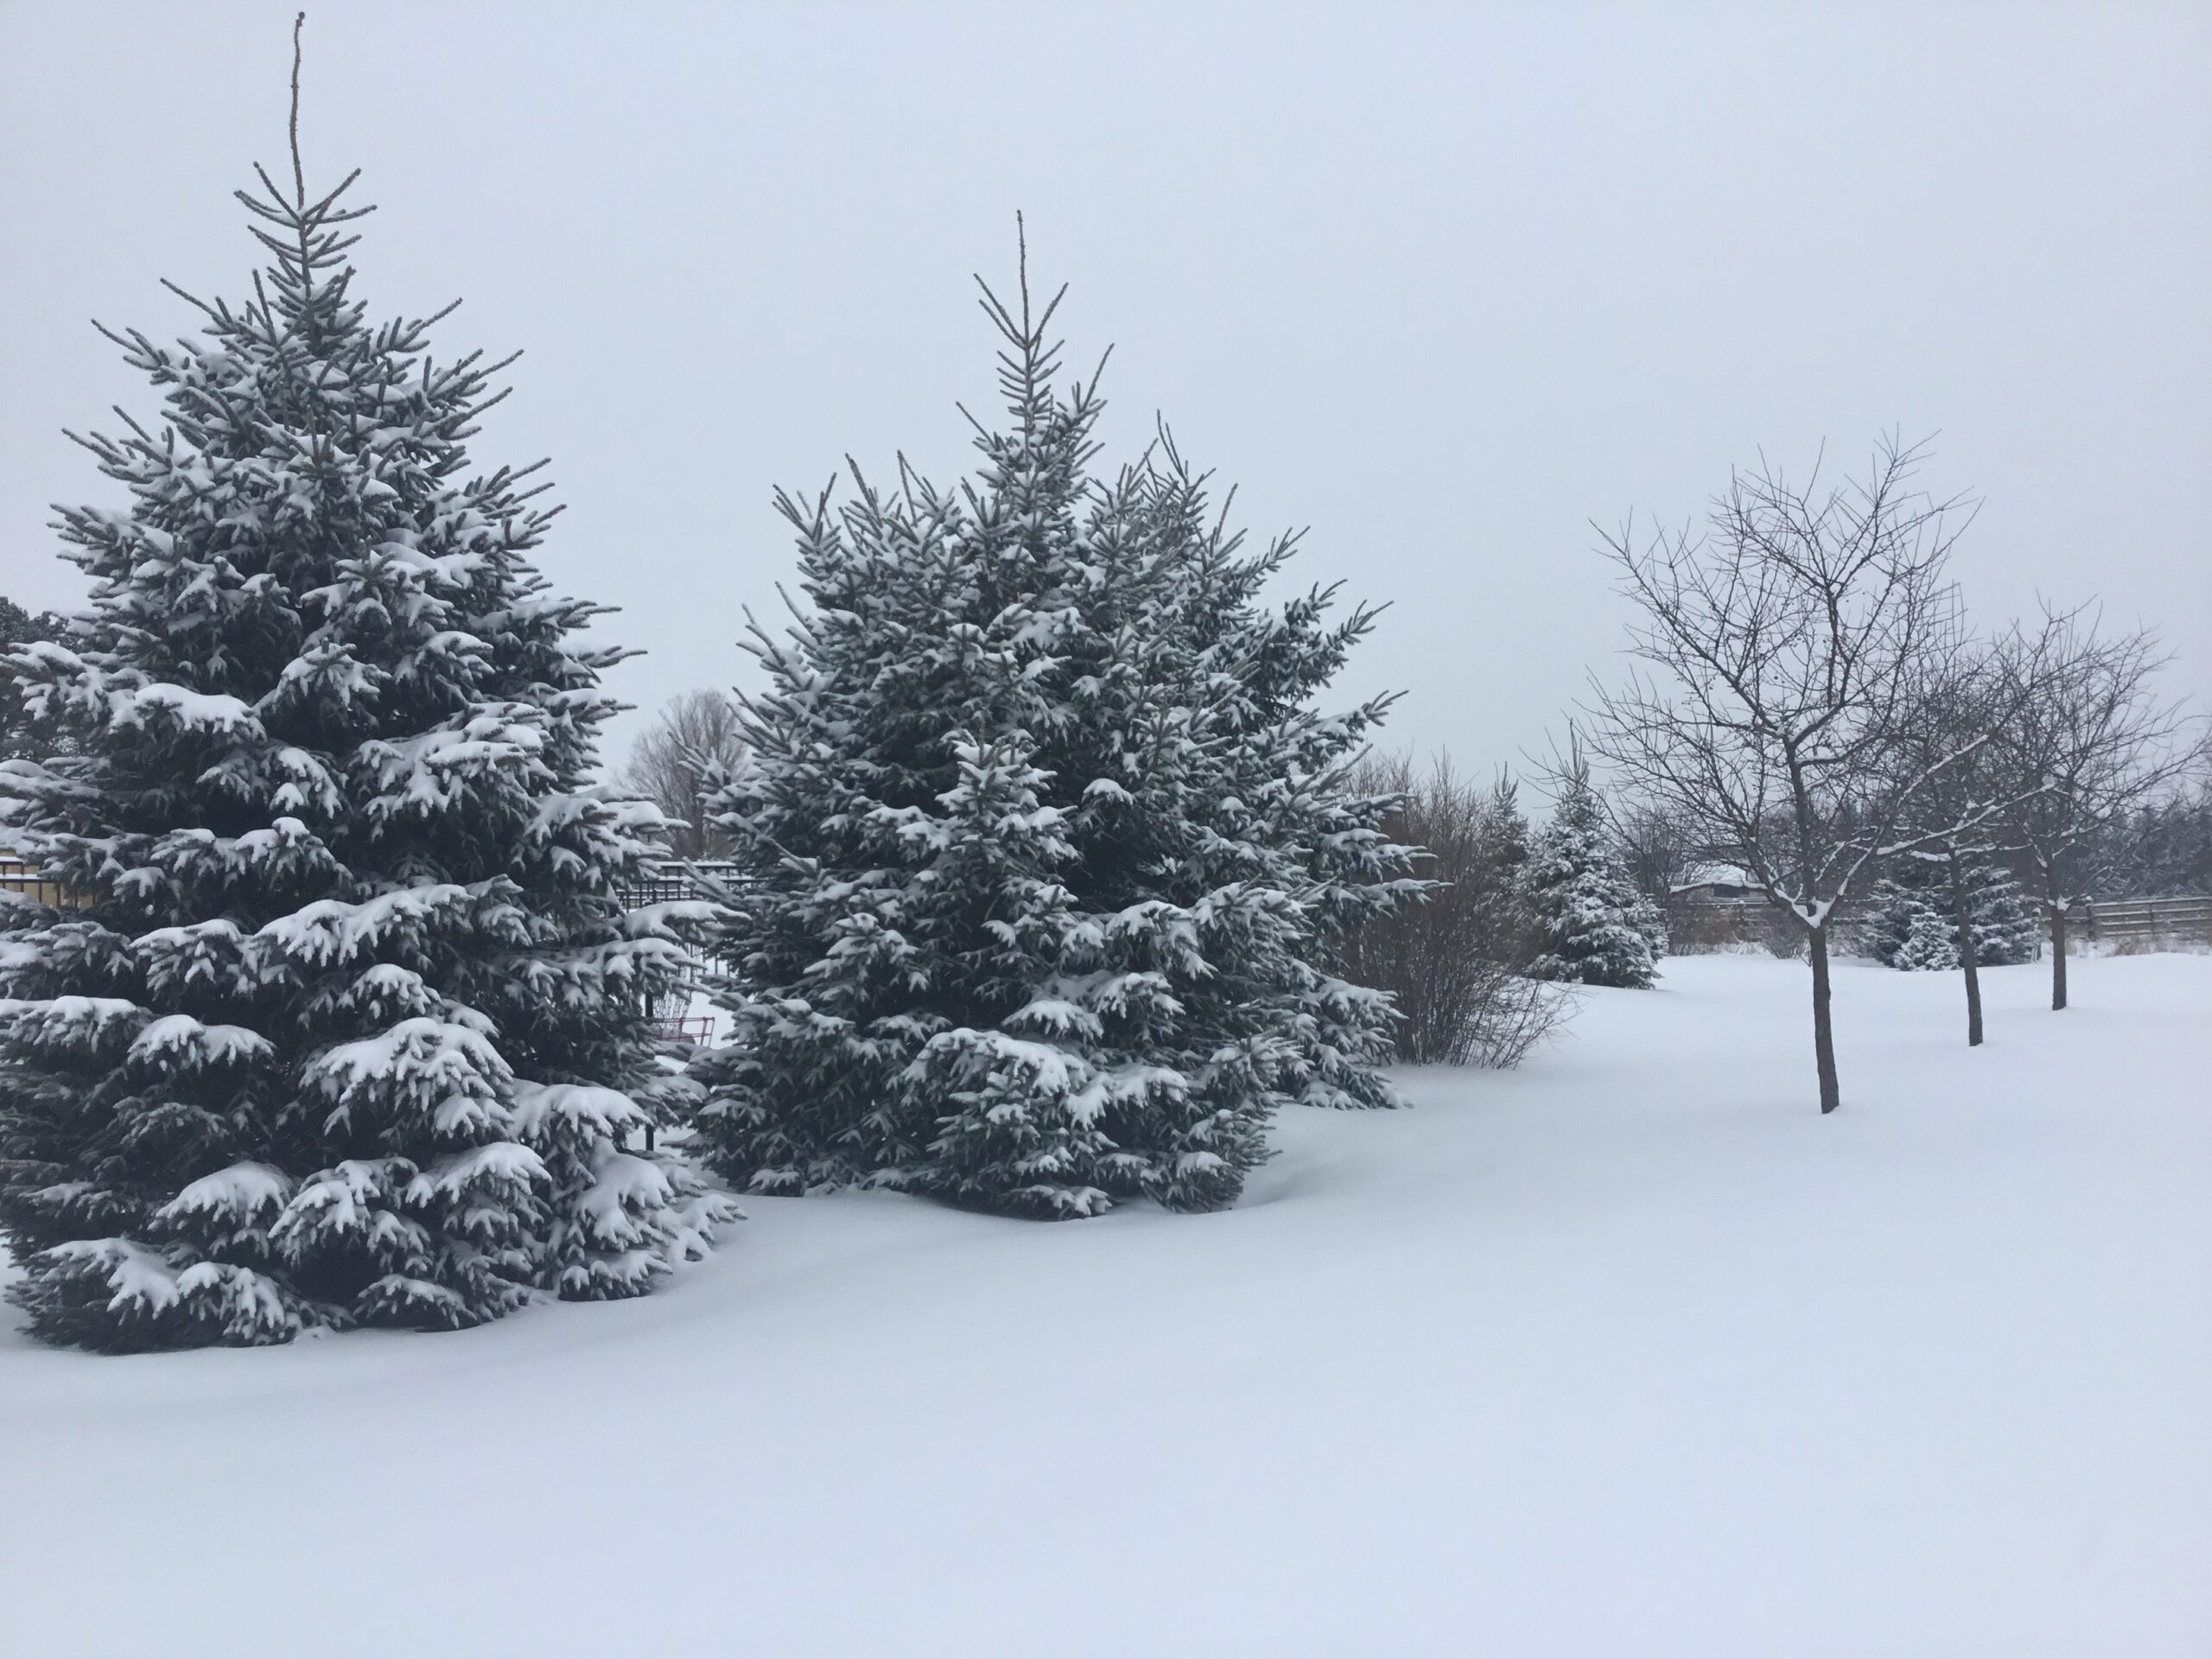 Tree care tips for the winter season